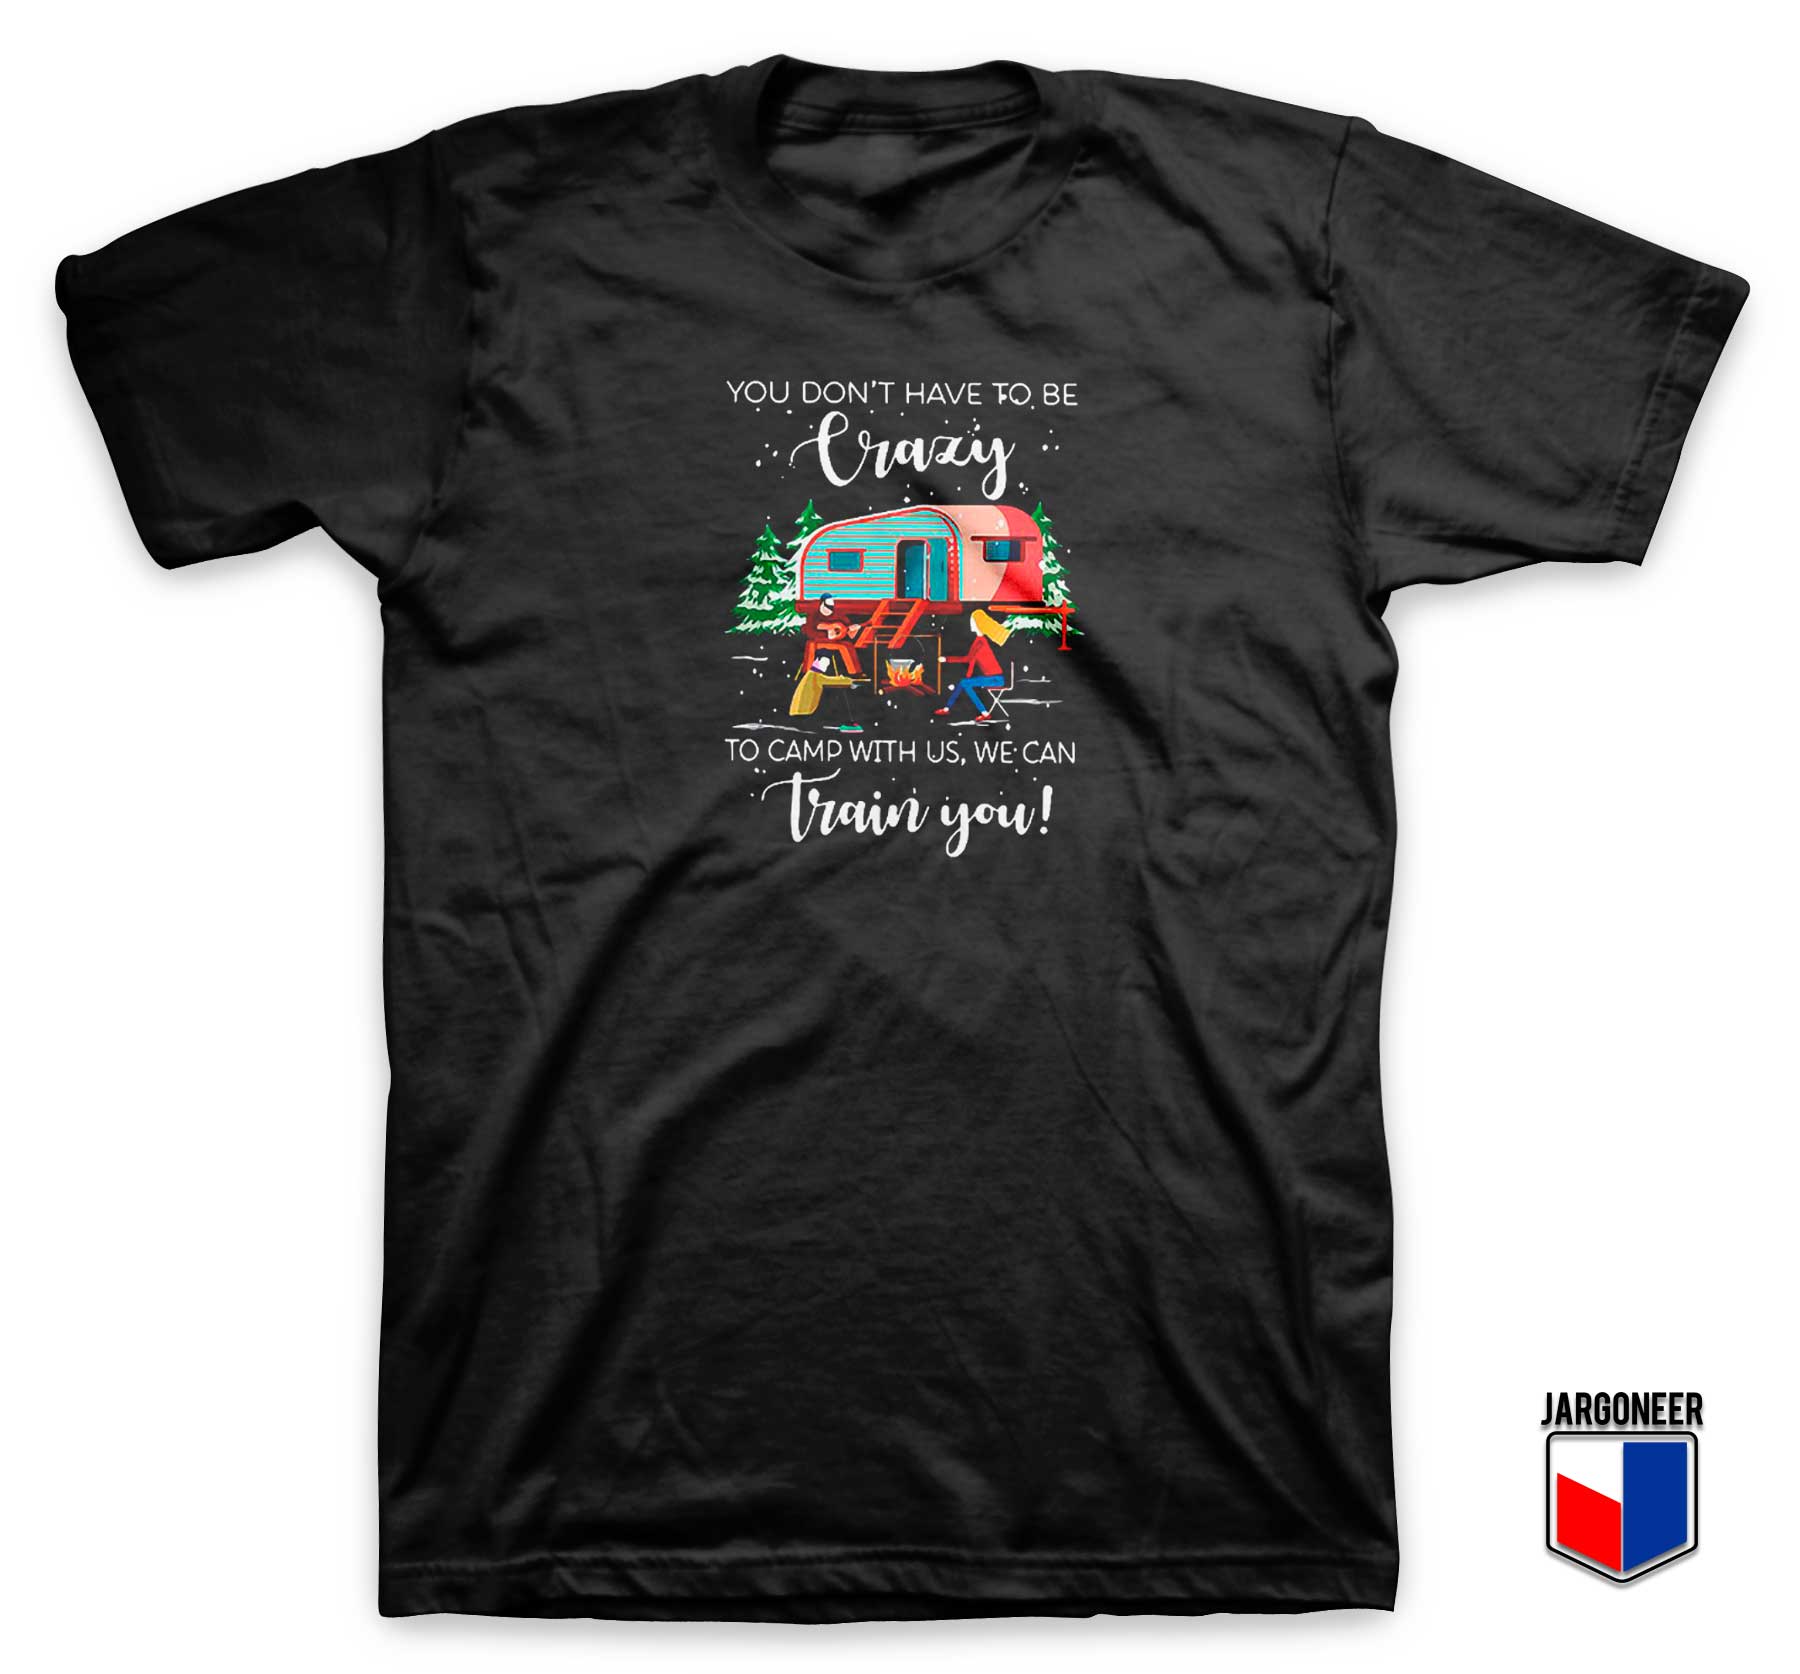 To Camp With Us We can Train You T Shirt - Shop Unique Graphic Cool Shirt Designs